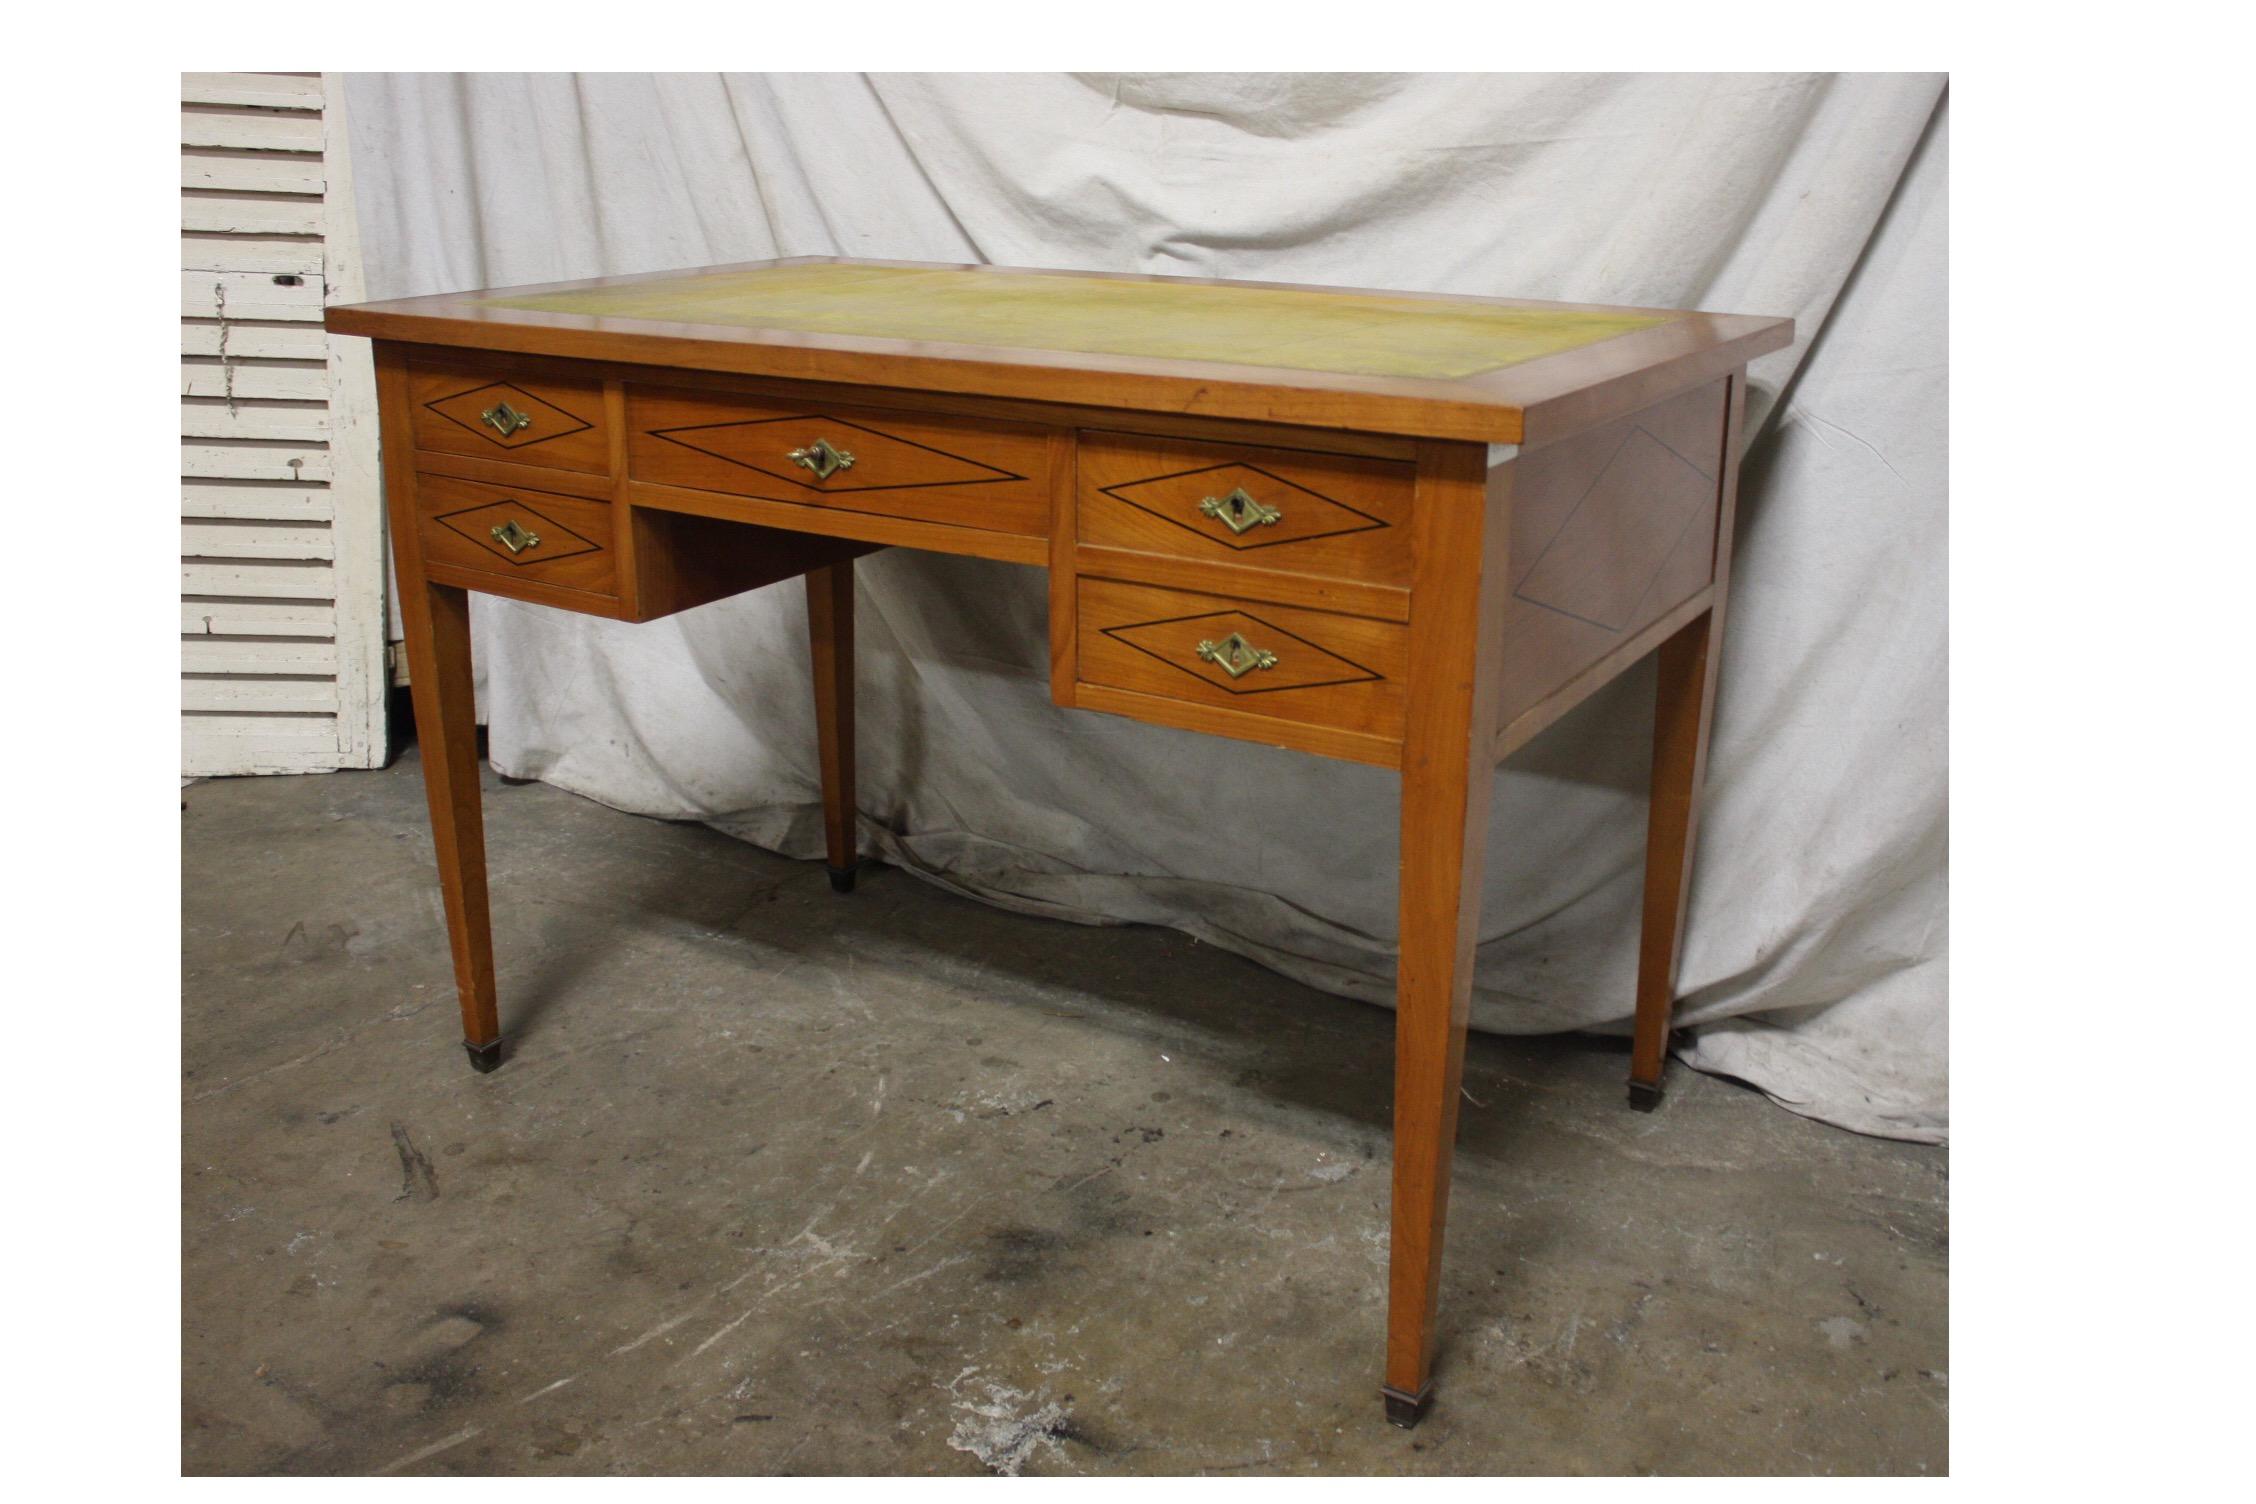 Mid-20th century French Directoire style desk.